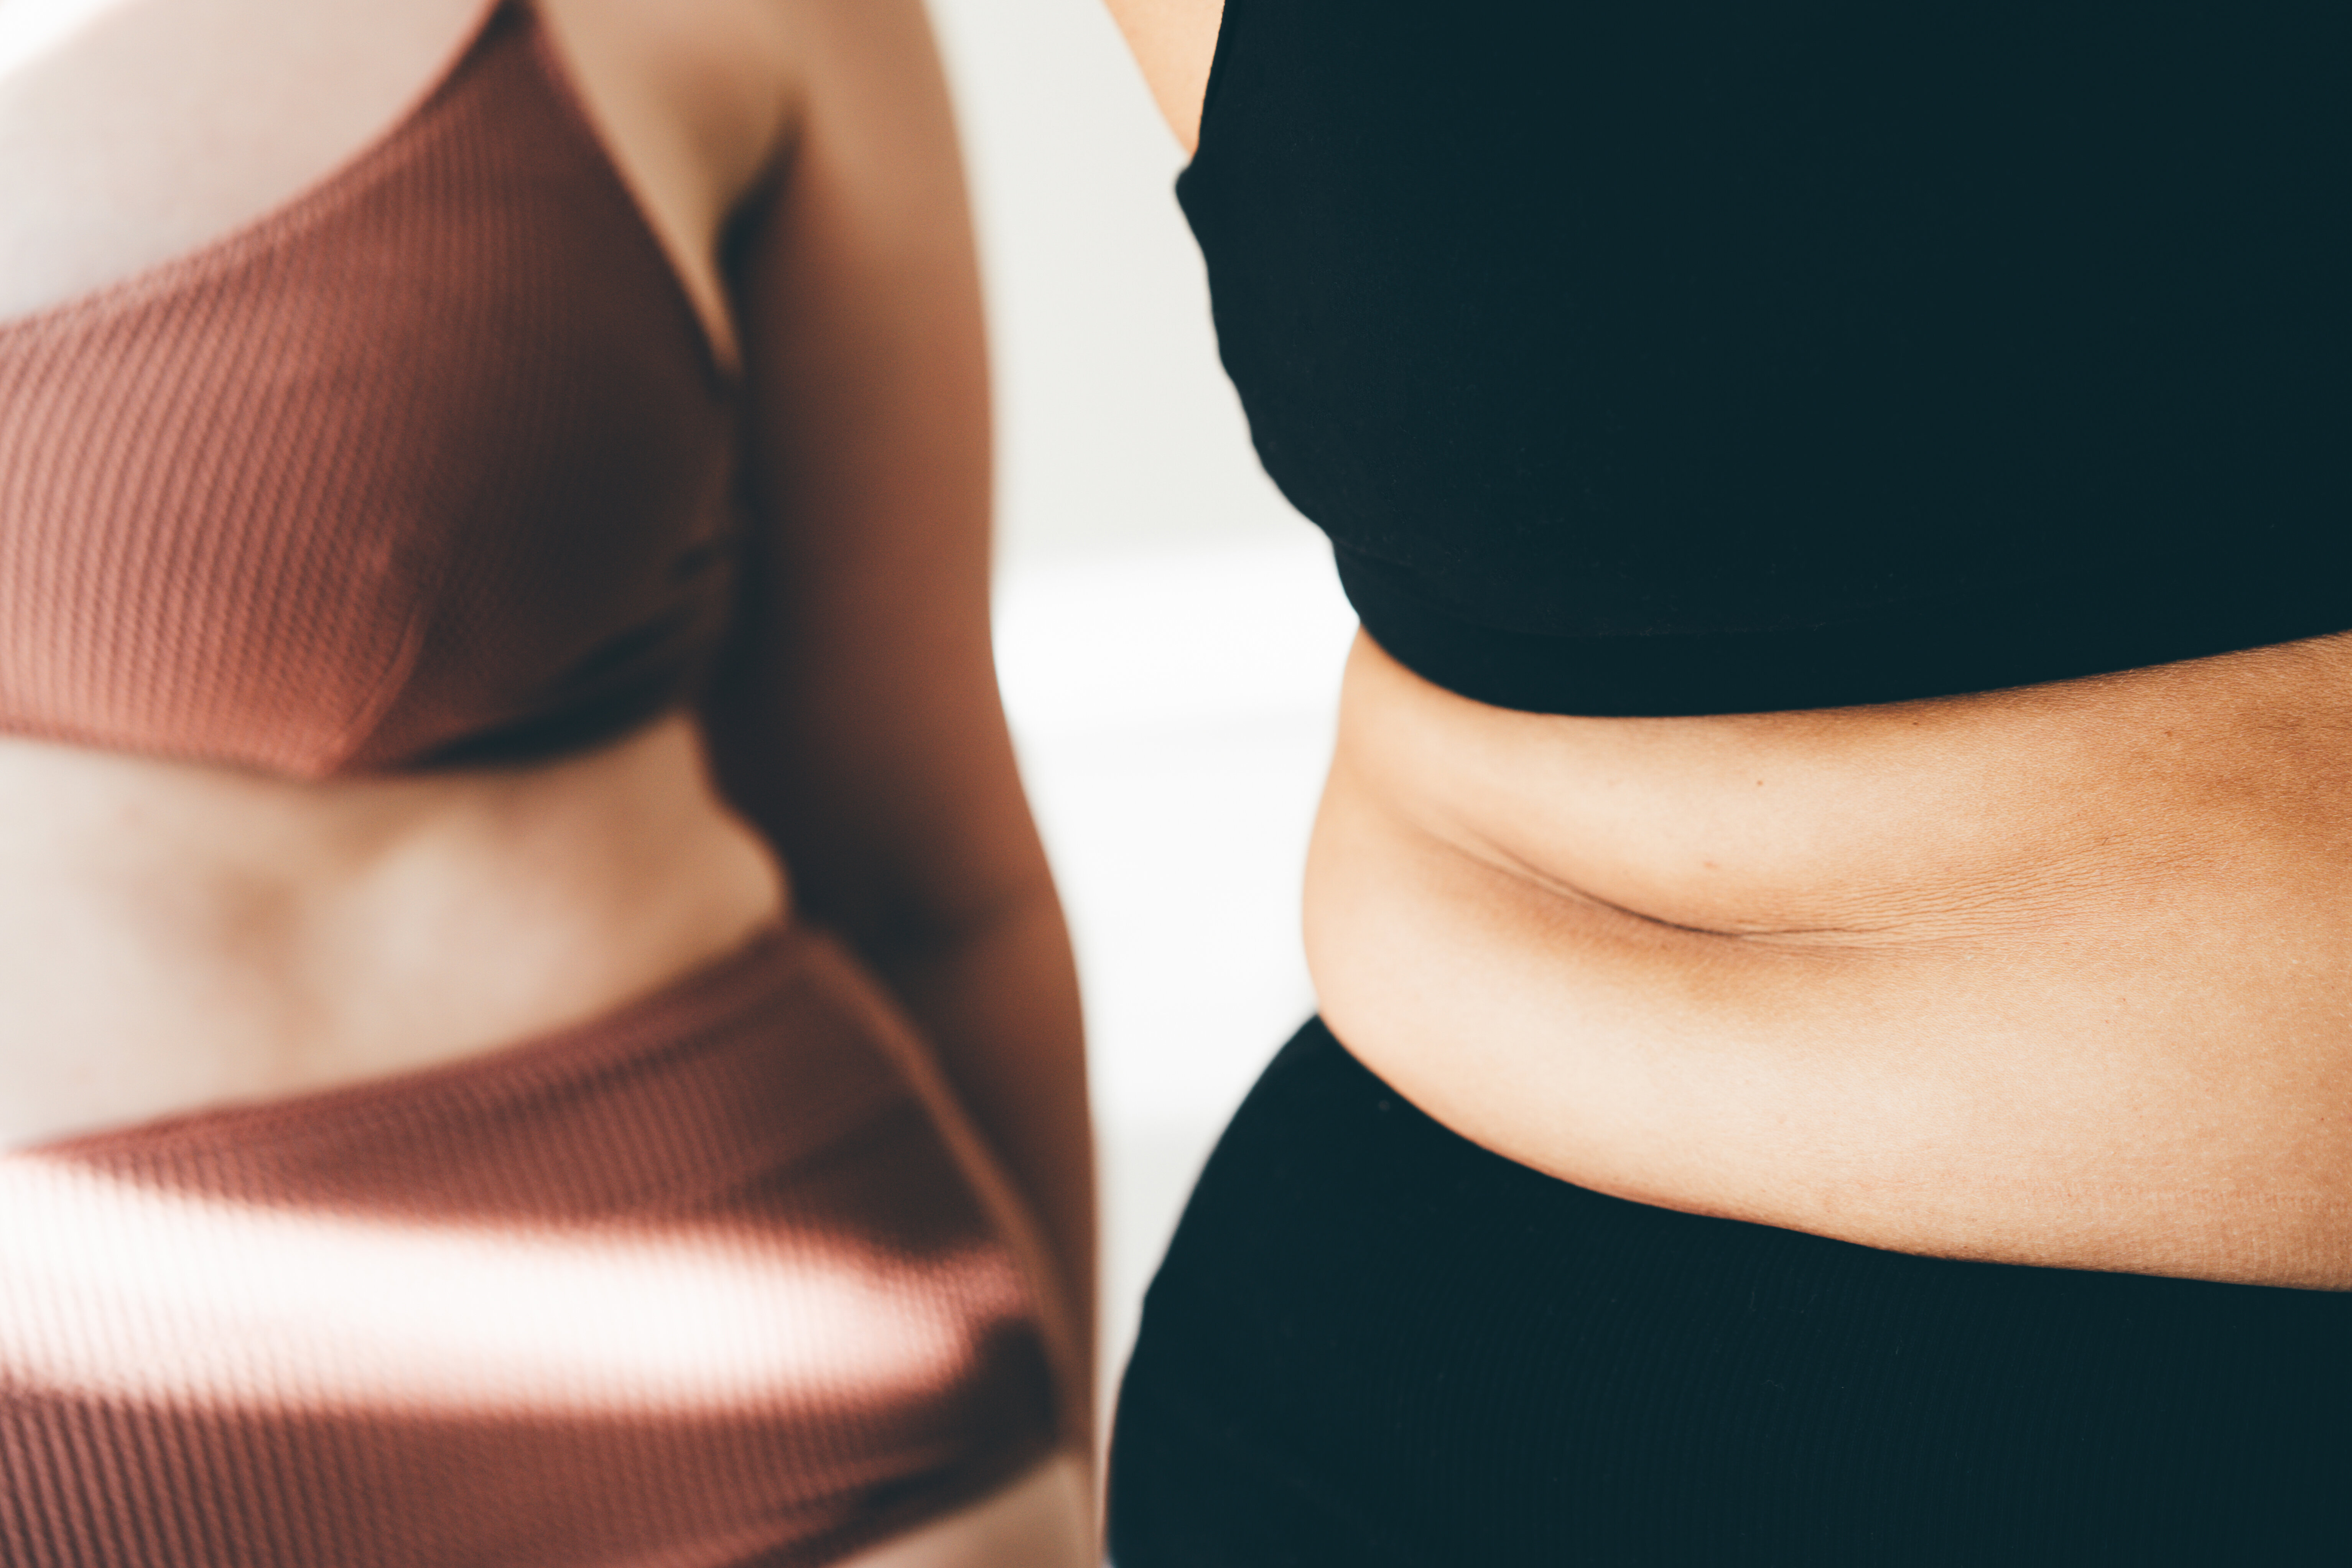 Two women in stylish, ribbed activewear tops and high-waisted bottoms are shown close up, highlighting body positivity and self-love. Names not known